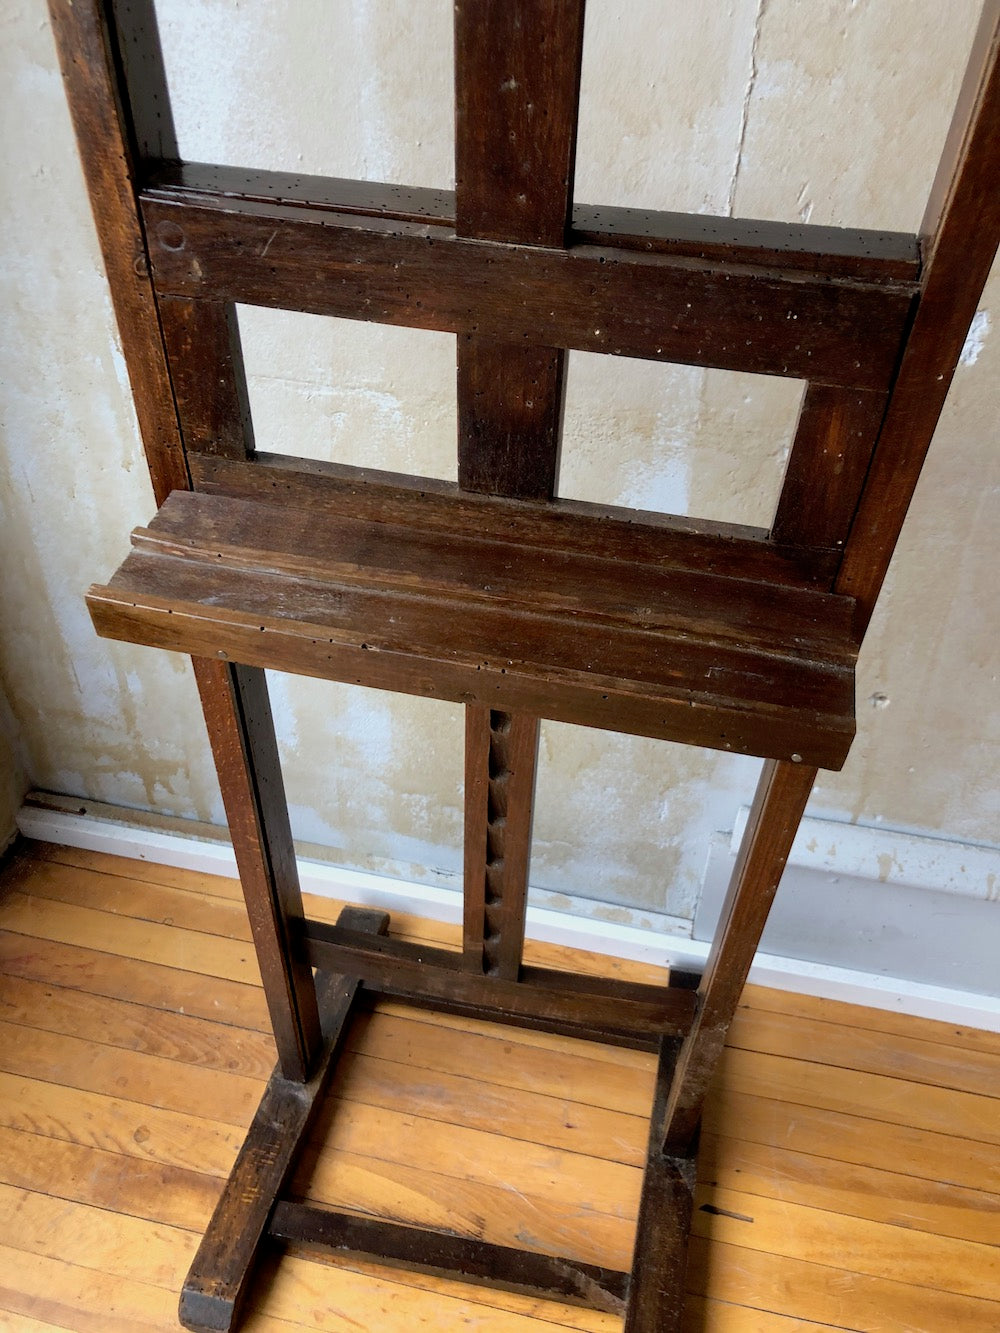 Italian Painters Easel in Wood, 1920s for sale at Pamono